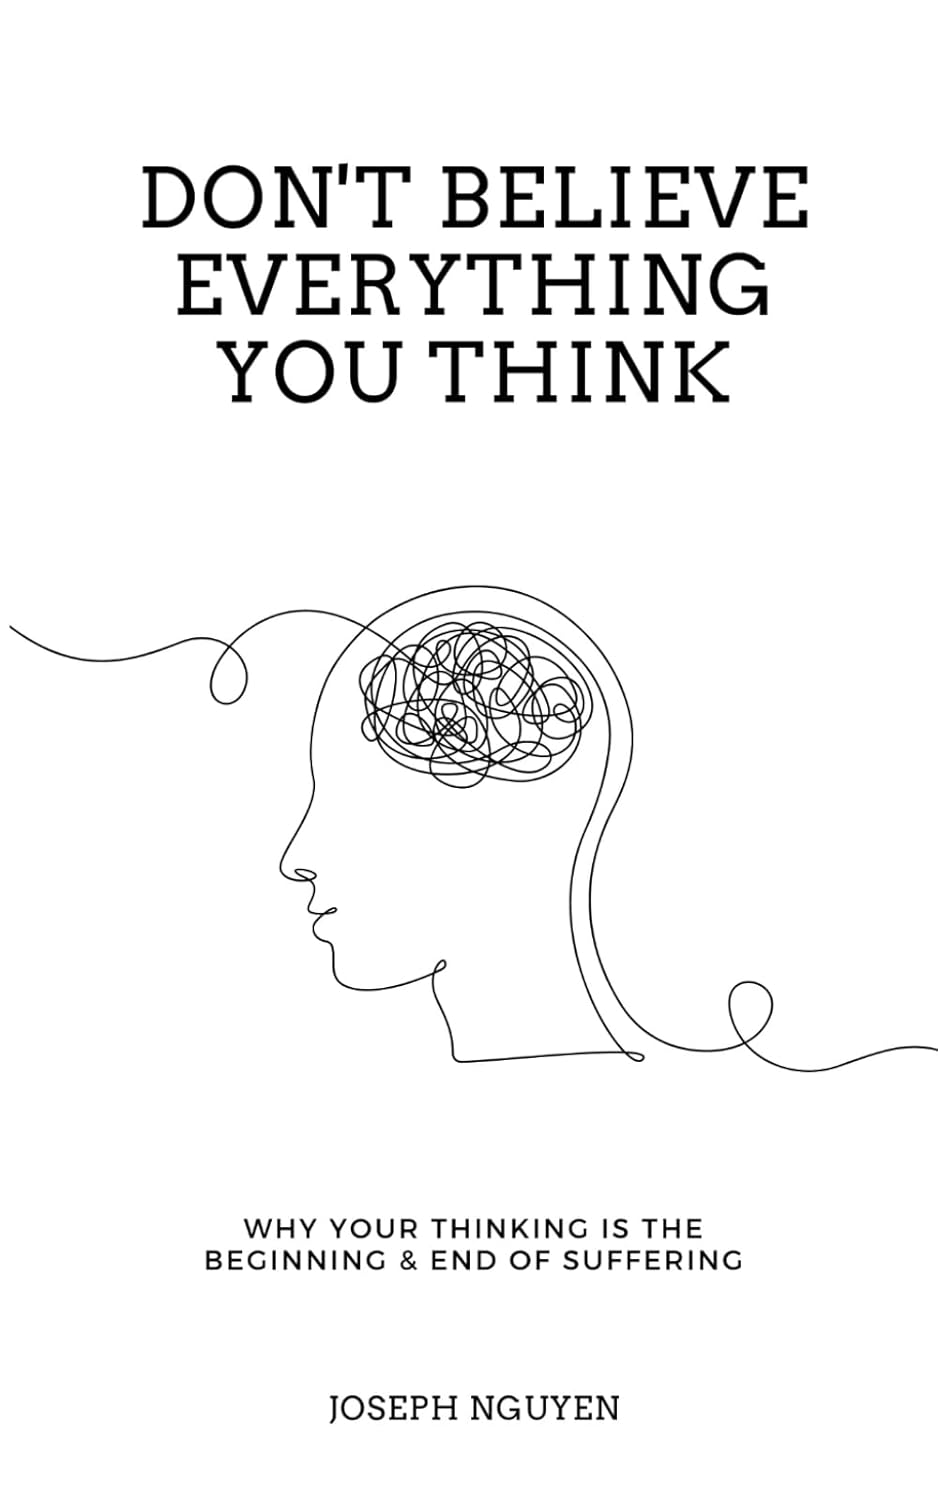 Cover of "Don't Believe Everything You Think" by Joseph Nguyen